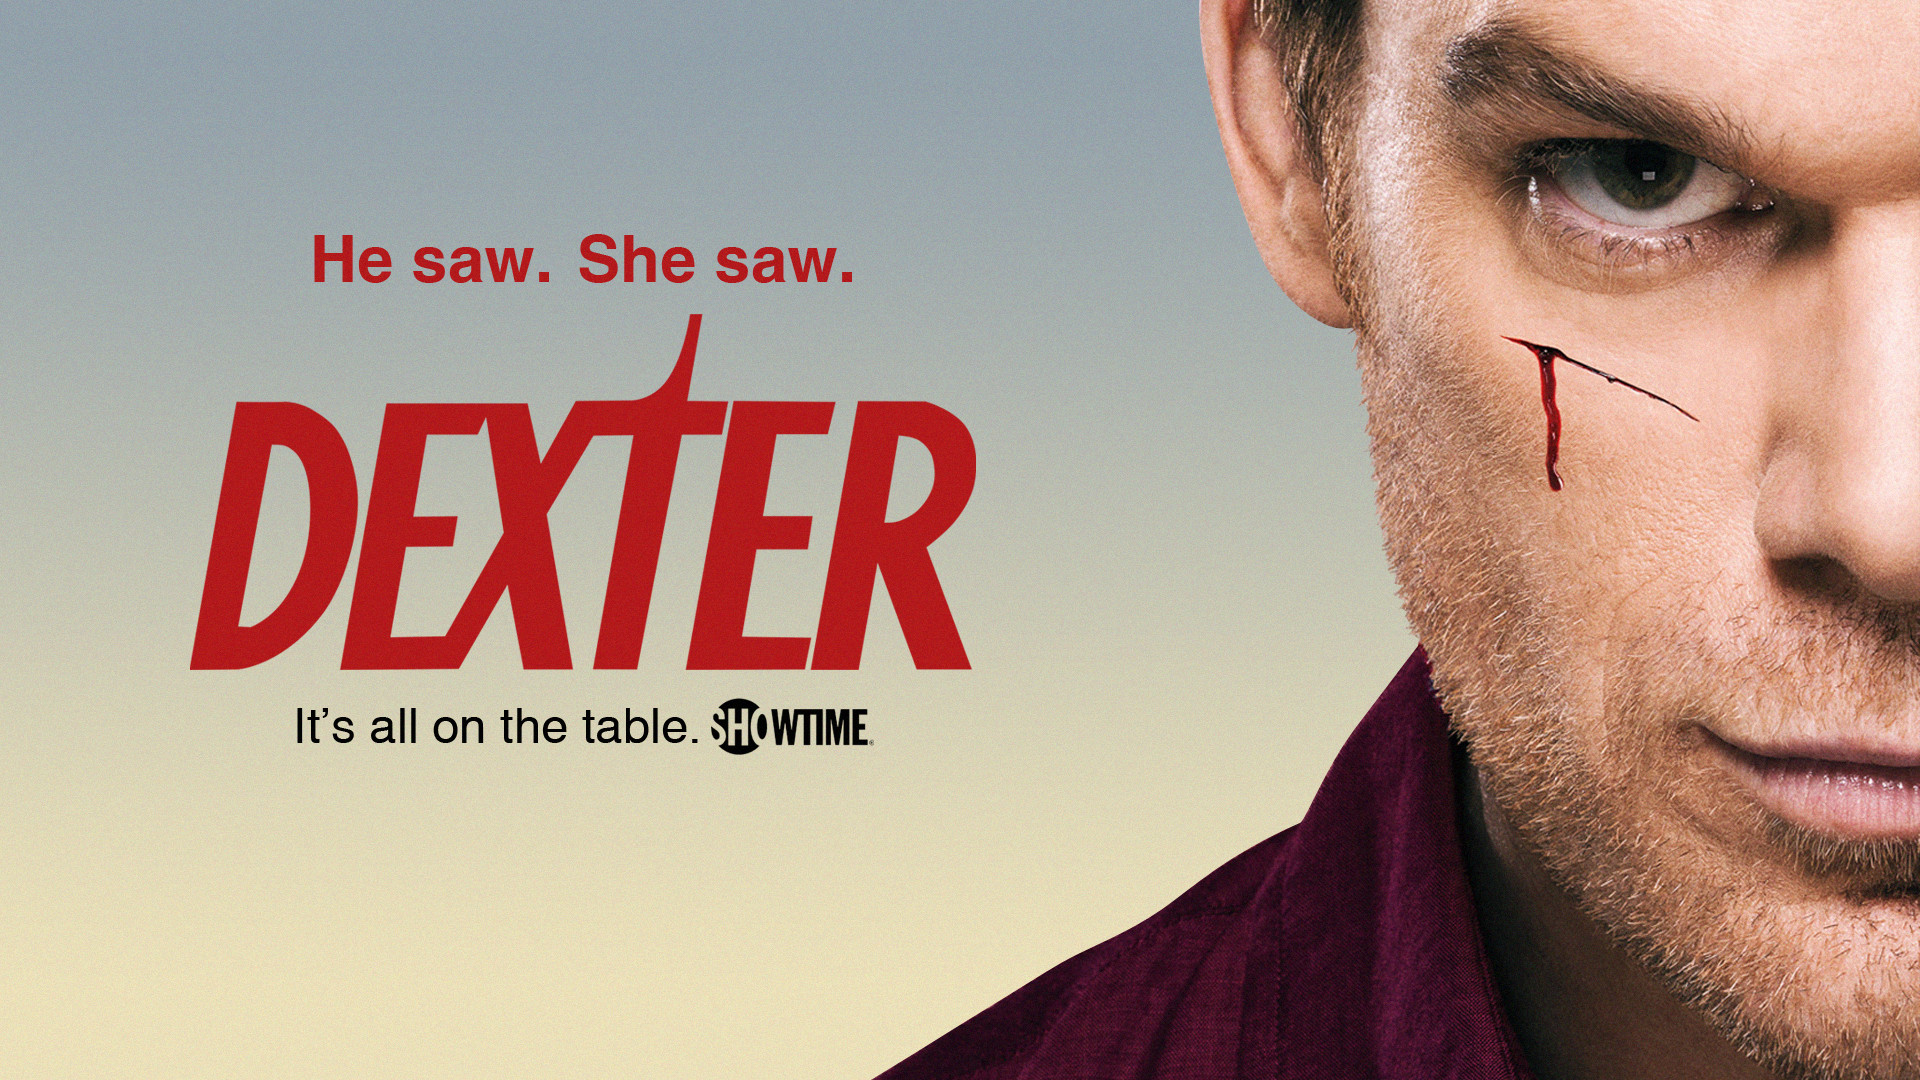 cashed up recommends dexter all seasons download free pic